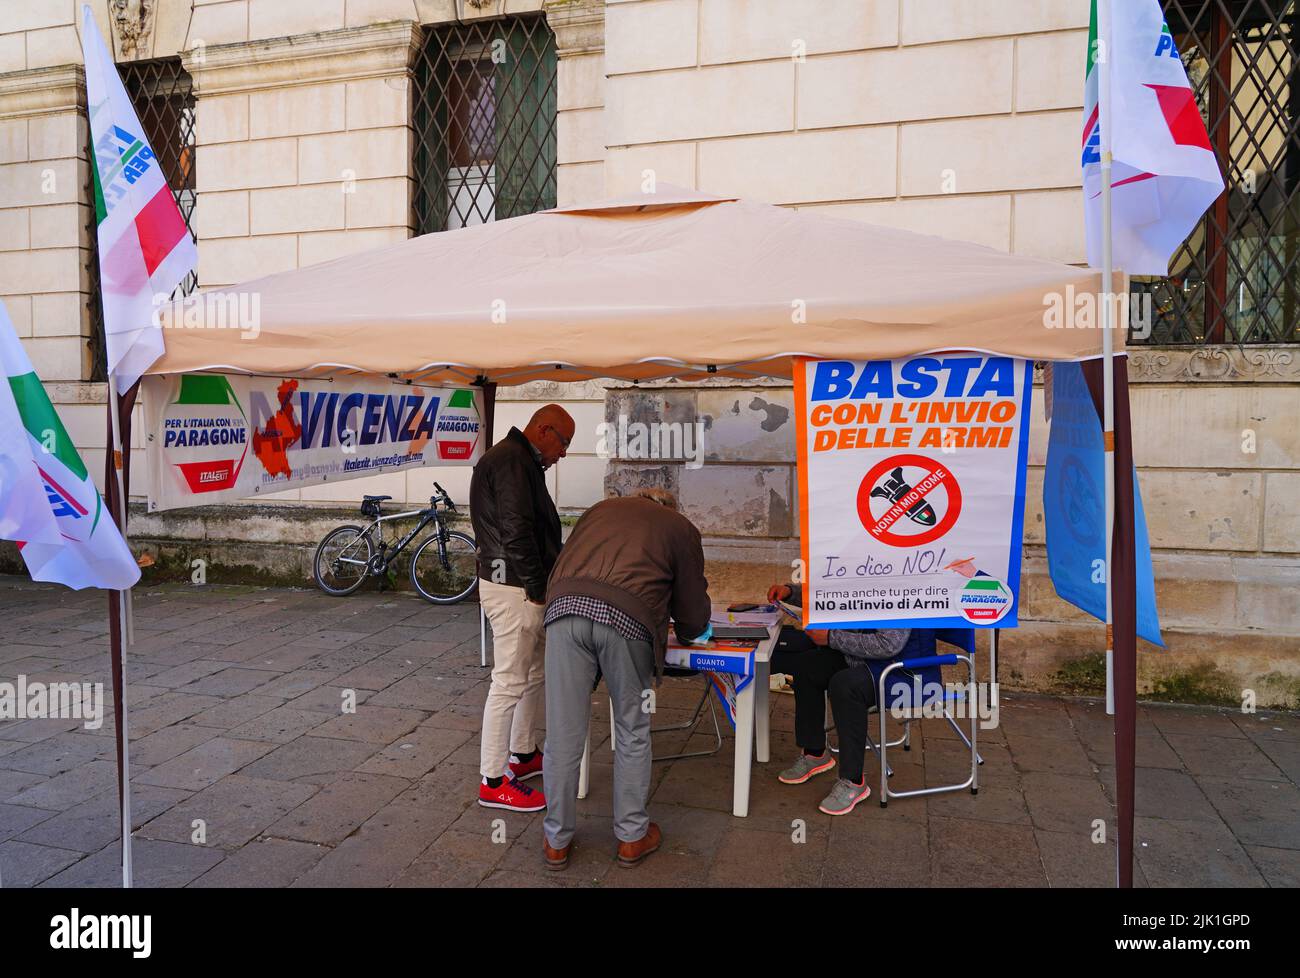 VICENZA, ITALY -16 APR 2022- View of supporters of the Italexit For Italy with Paragone political party, a Eurosceptic far right political party in It Stock Photo